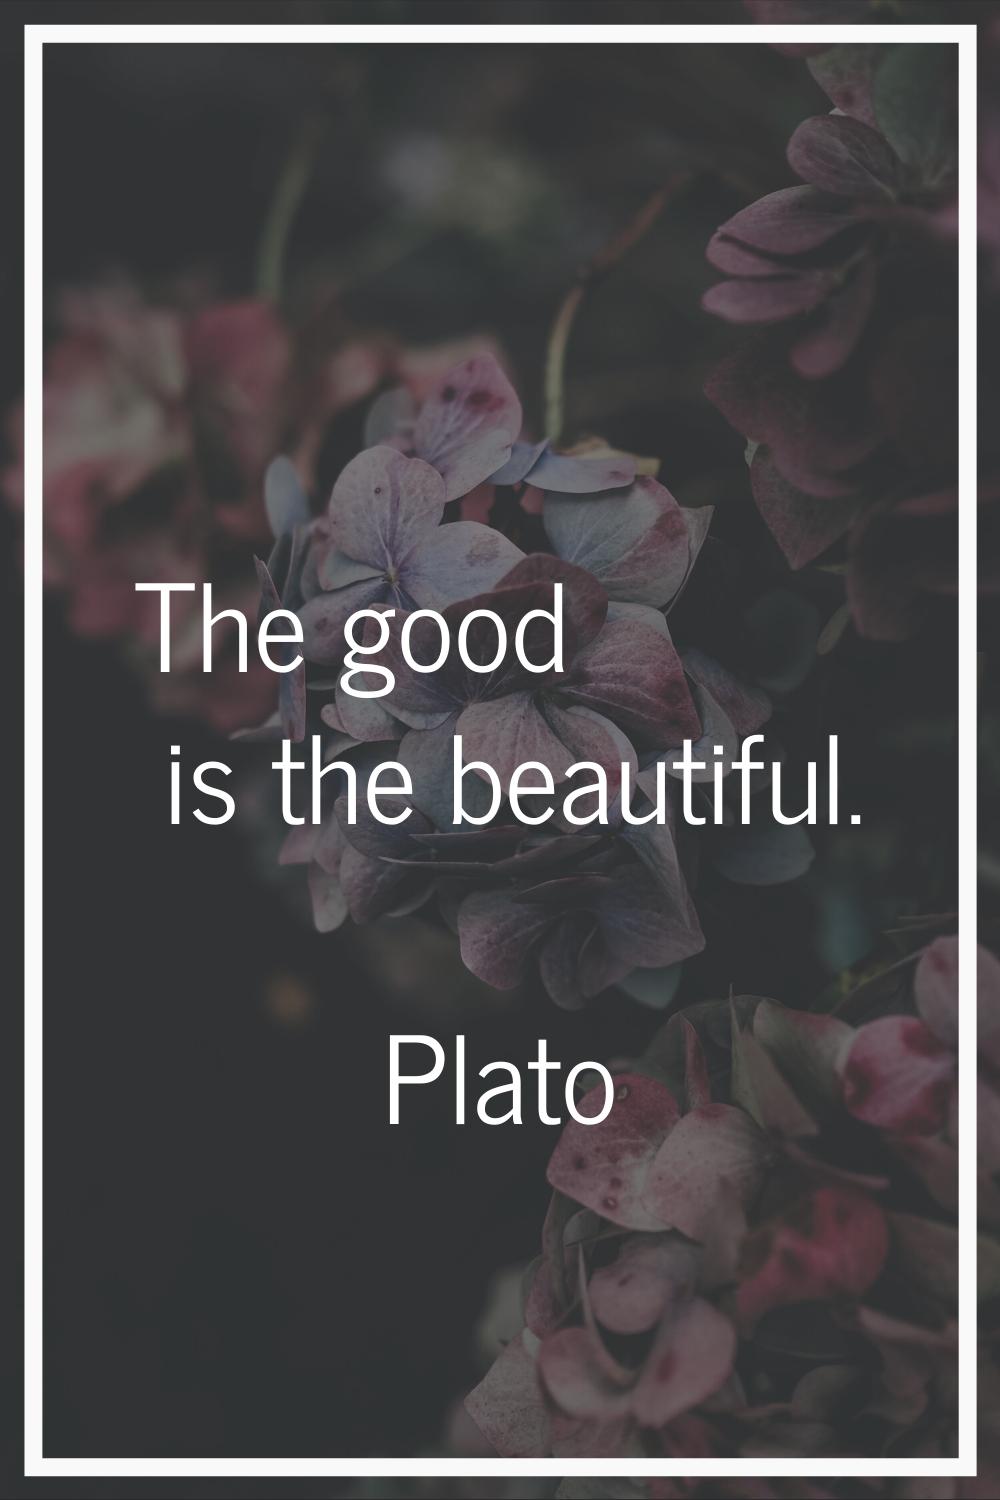 The good is the beautiful.